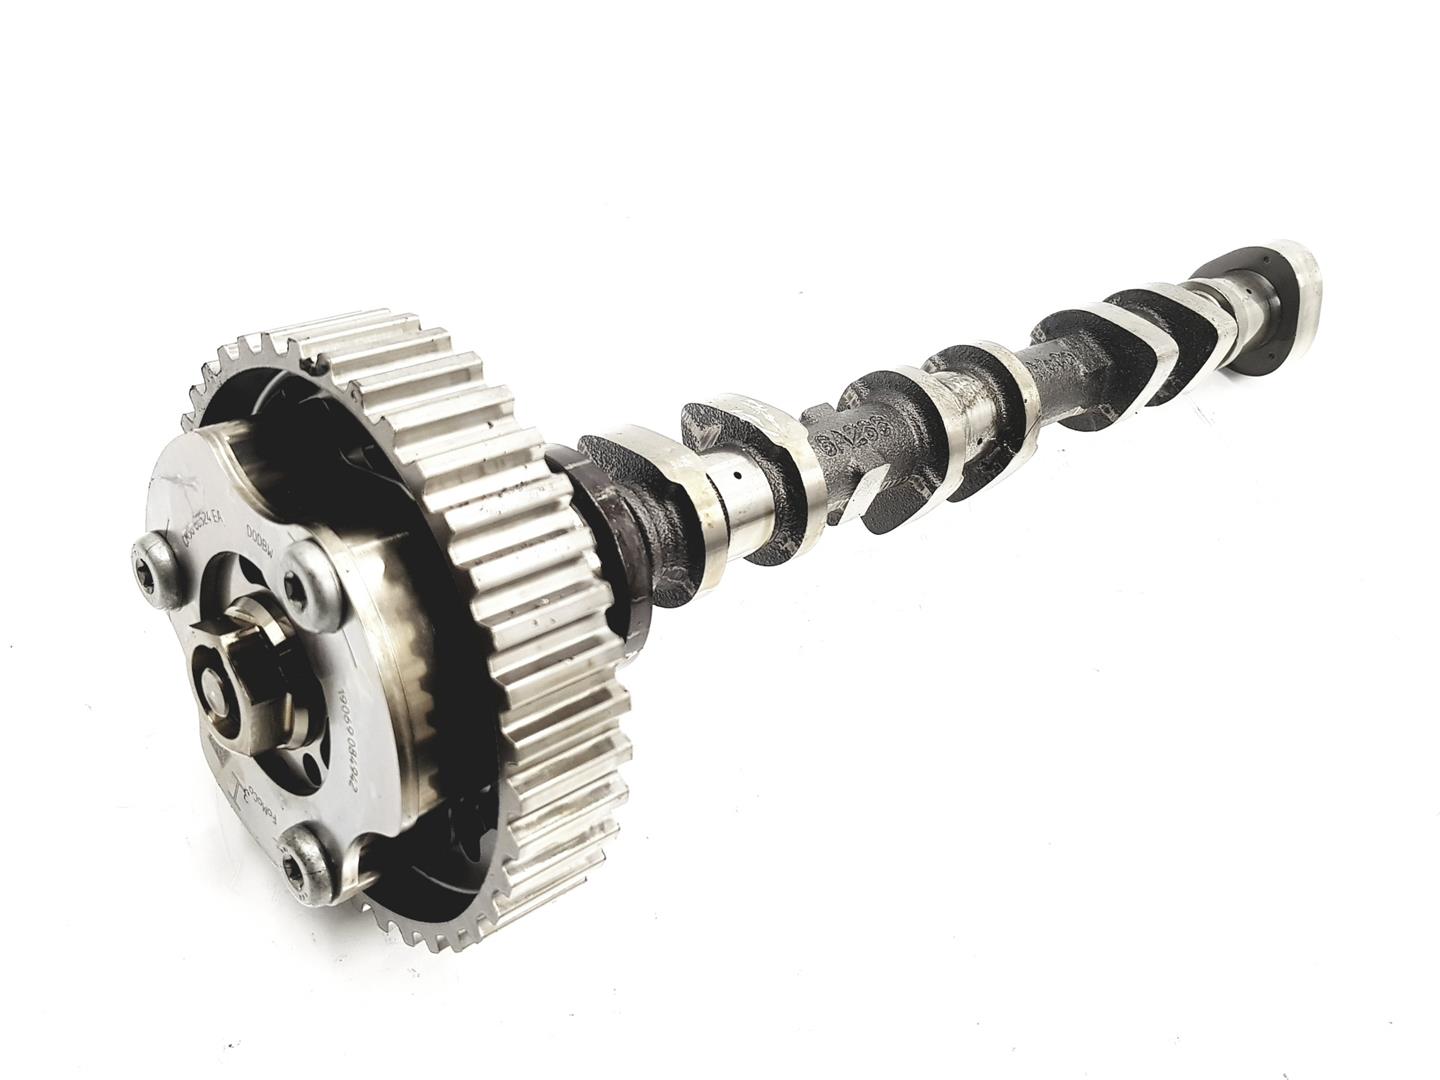 FORD C-Max 2 generation (2010-2019) Exhaust Camshaft 2300725, M1JU, ADMISION 19921944